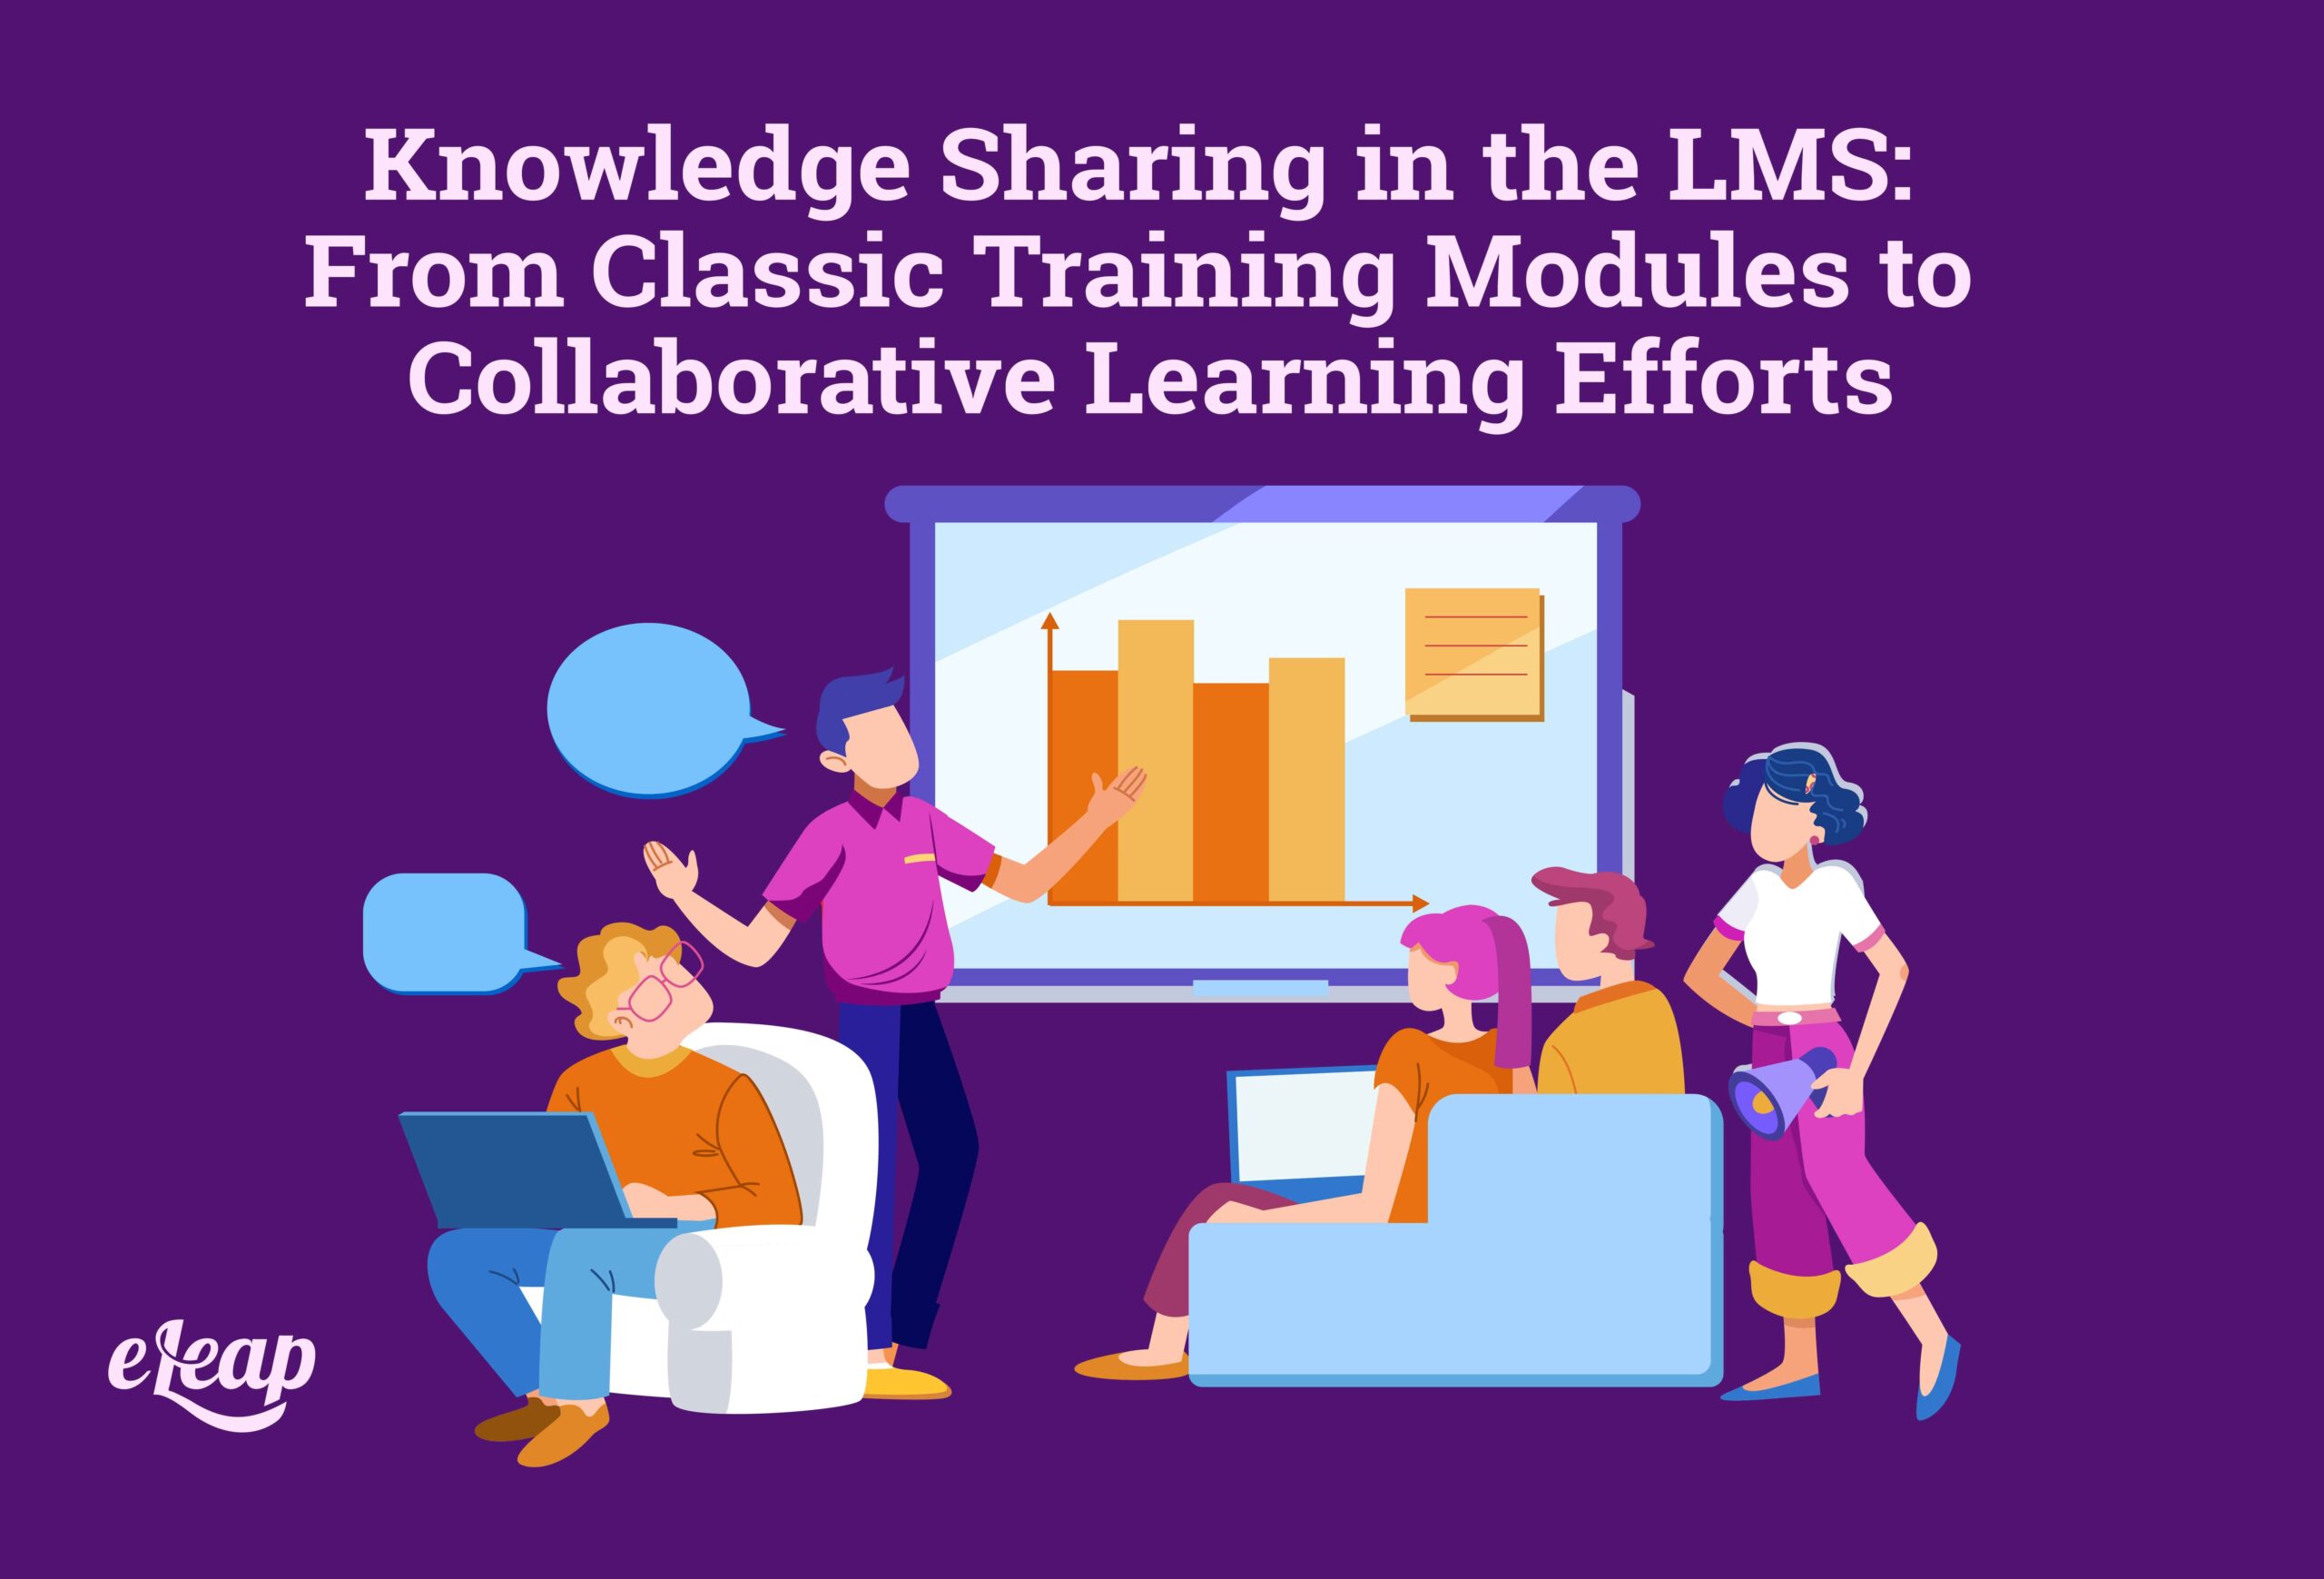 Knowledge Sharing in the LMS: From Classic Training Modules to Collaborative Learning Efforts